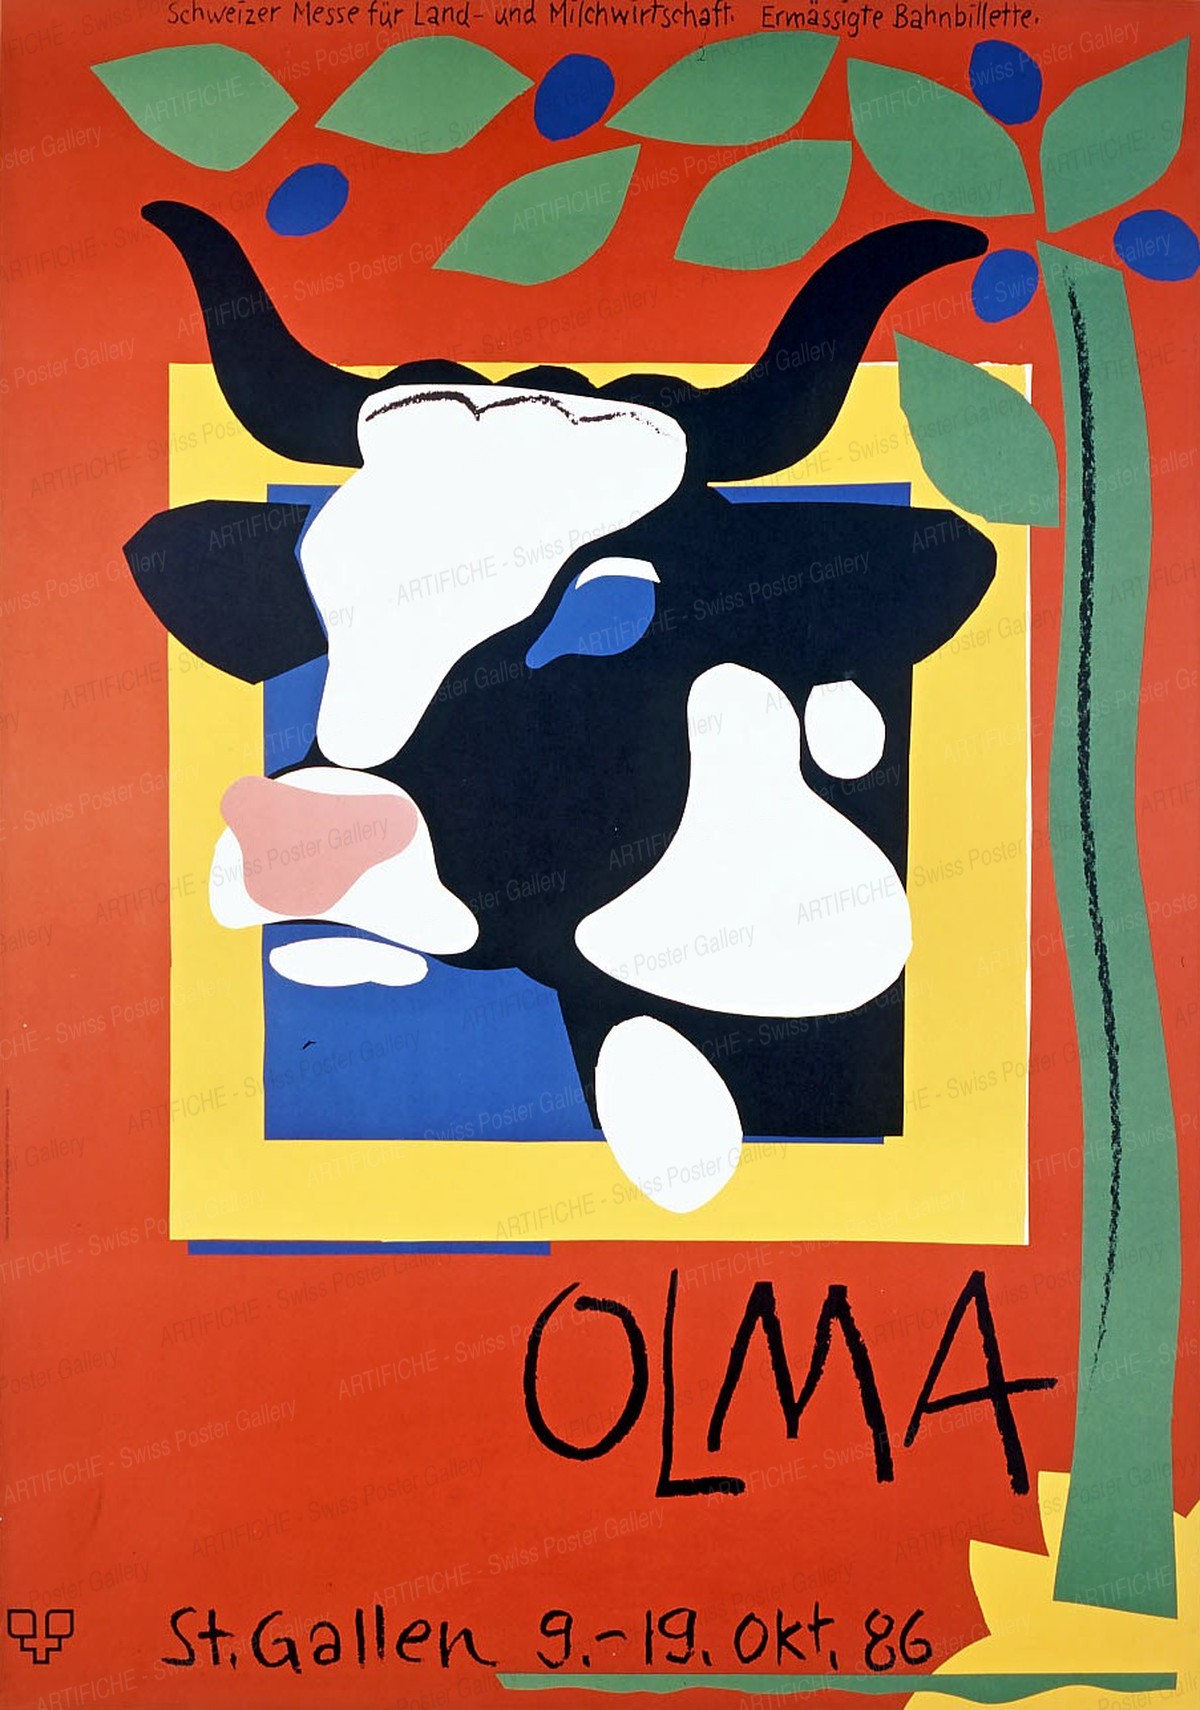 Olma St. Gall – Swiss Fair for Agriculture and Nutrition, Ruedi Külling